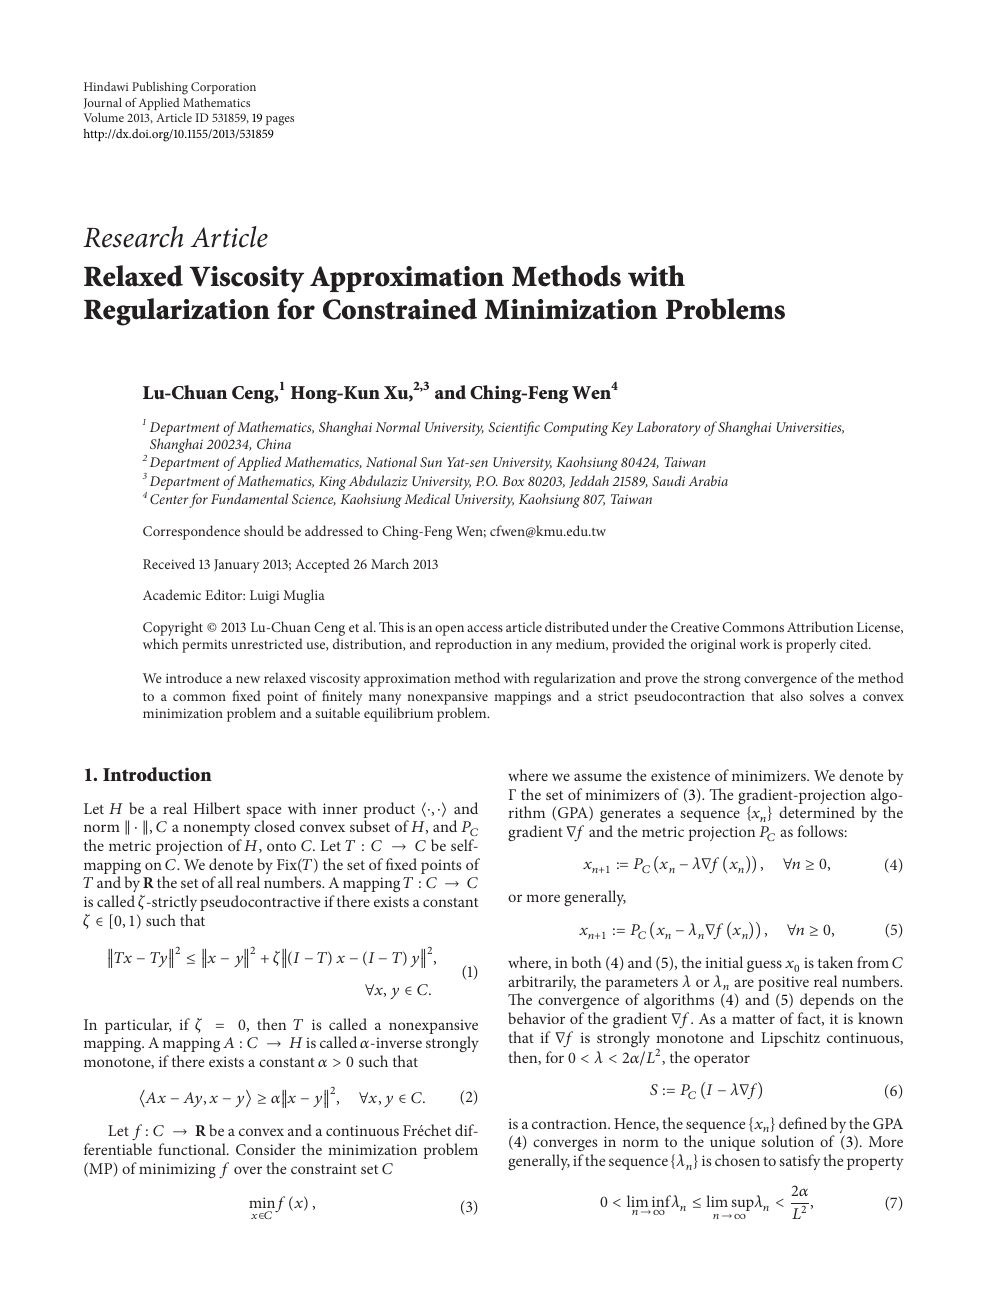 Relaxed Viscosity Approximation Methods With Regularization For Constrained Minimization Problems Topic Of Research Paper In Mathematics Download Scholarly Article Pdf And Read For Free On Cyberleninka Open Science Hub